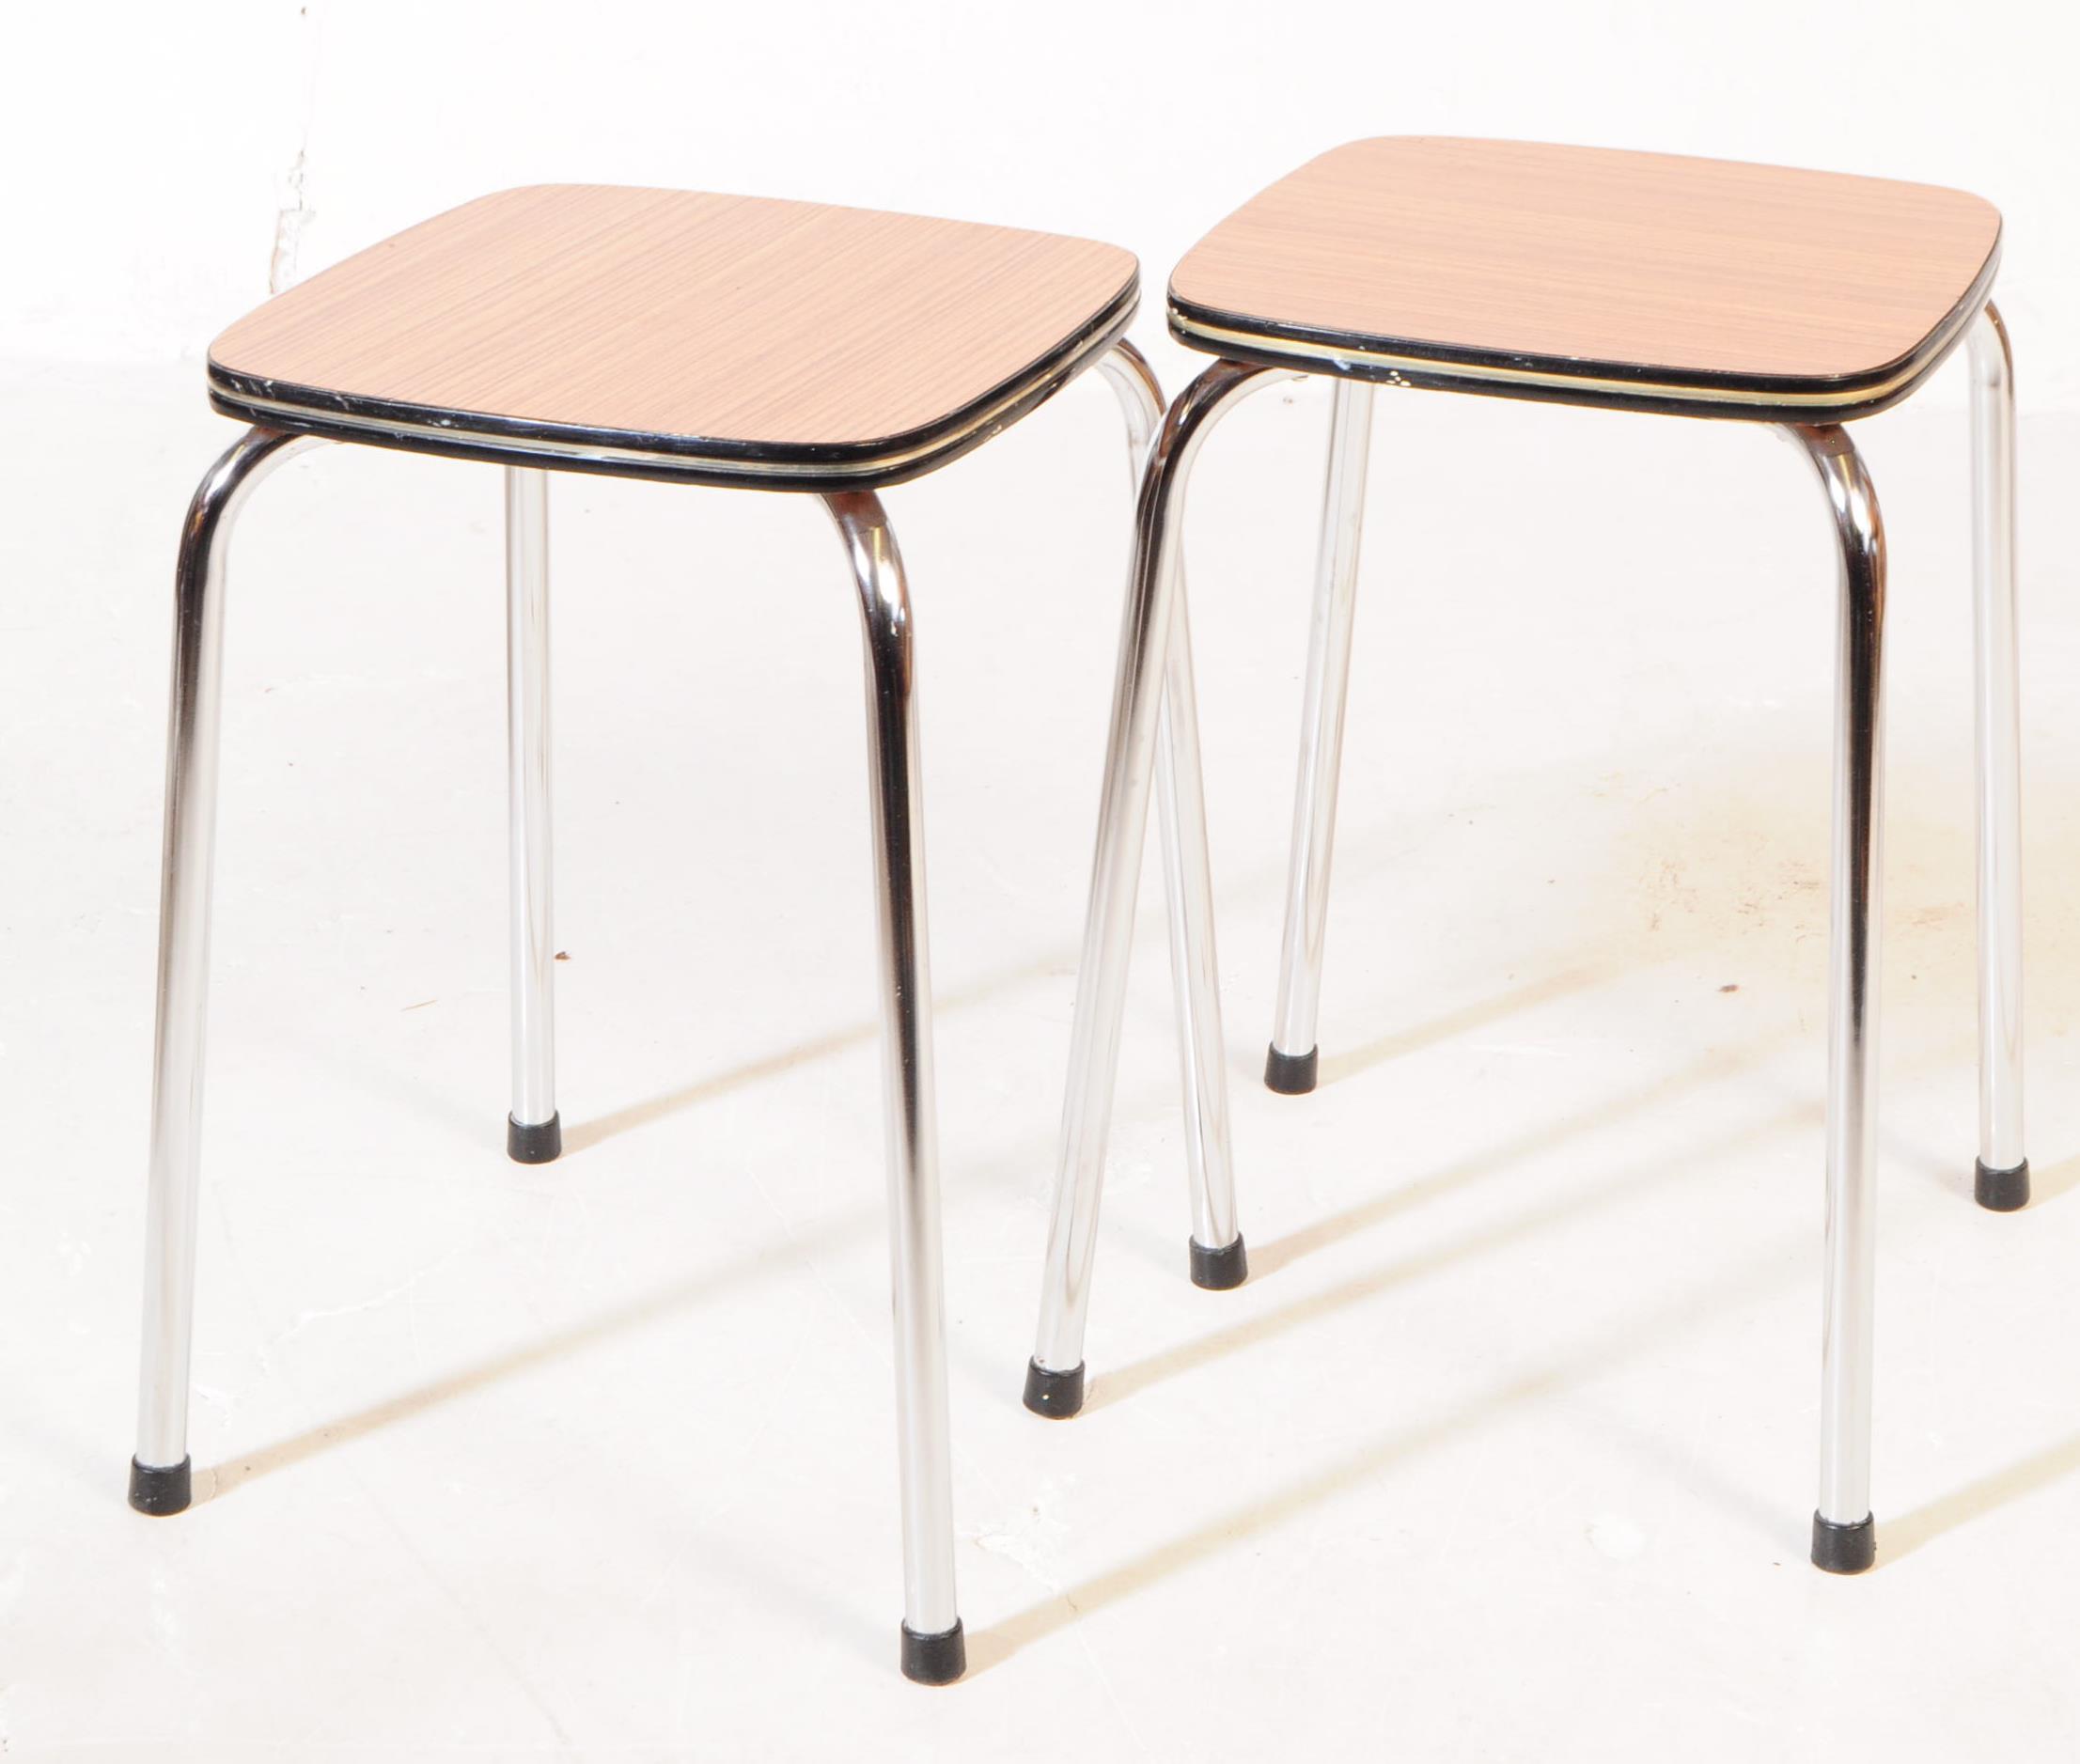 BRITISH MODERN DESIGN - FORMICA KITCHEN TABLE - CHAIRS - STOOLS - Image 6 of 9